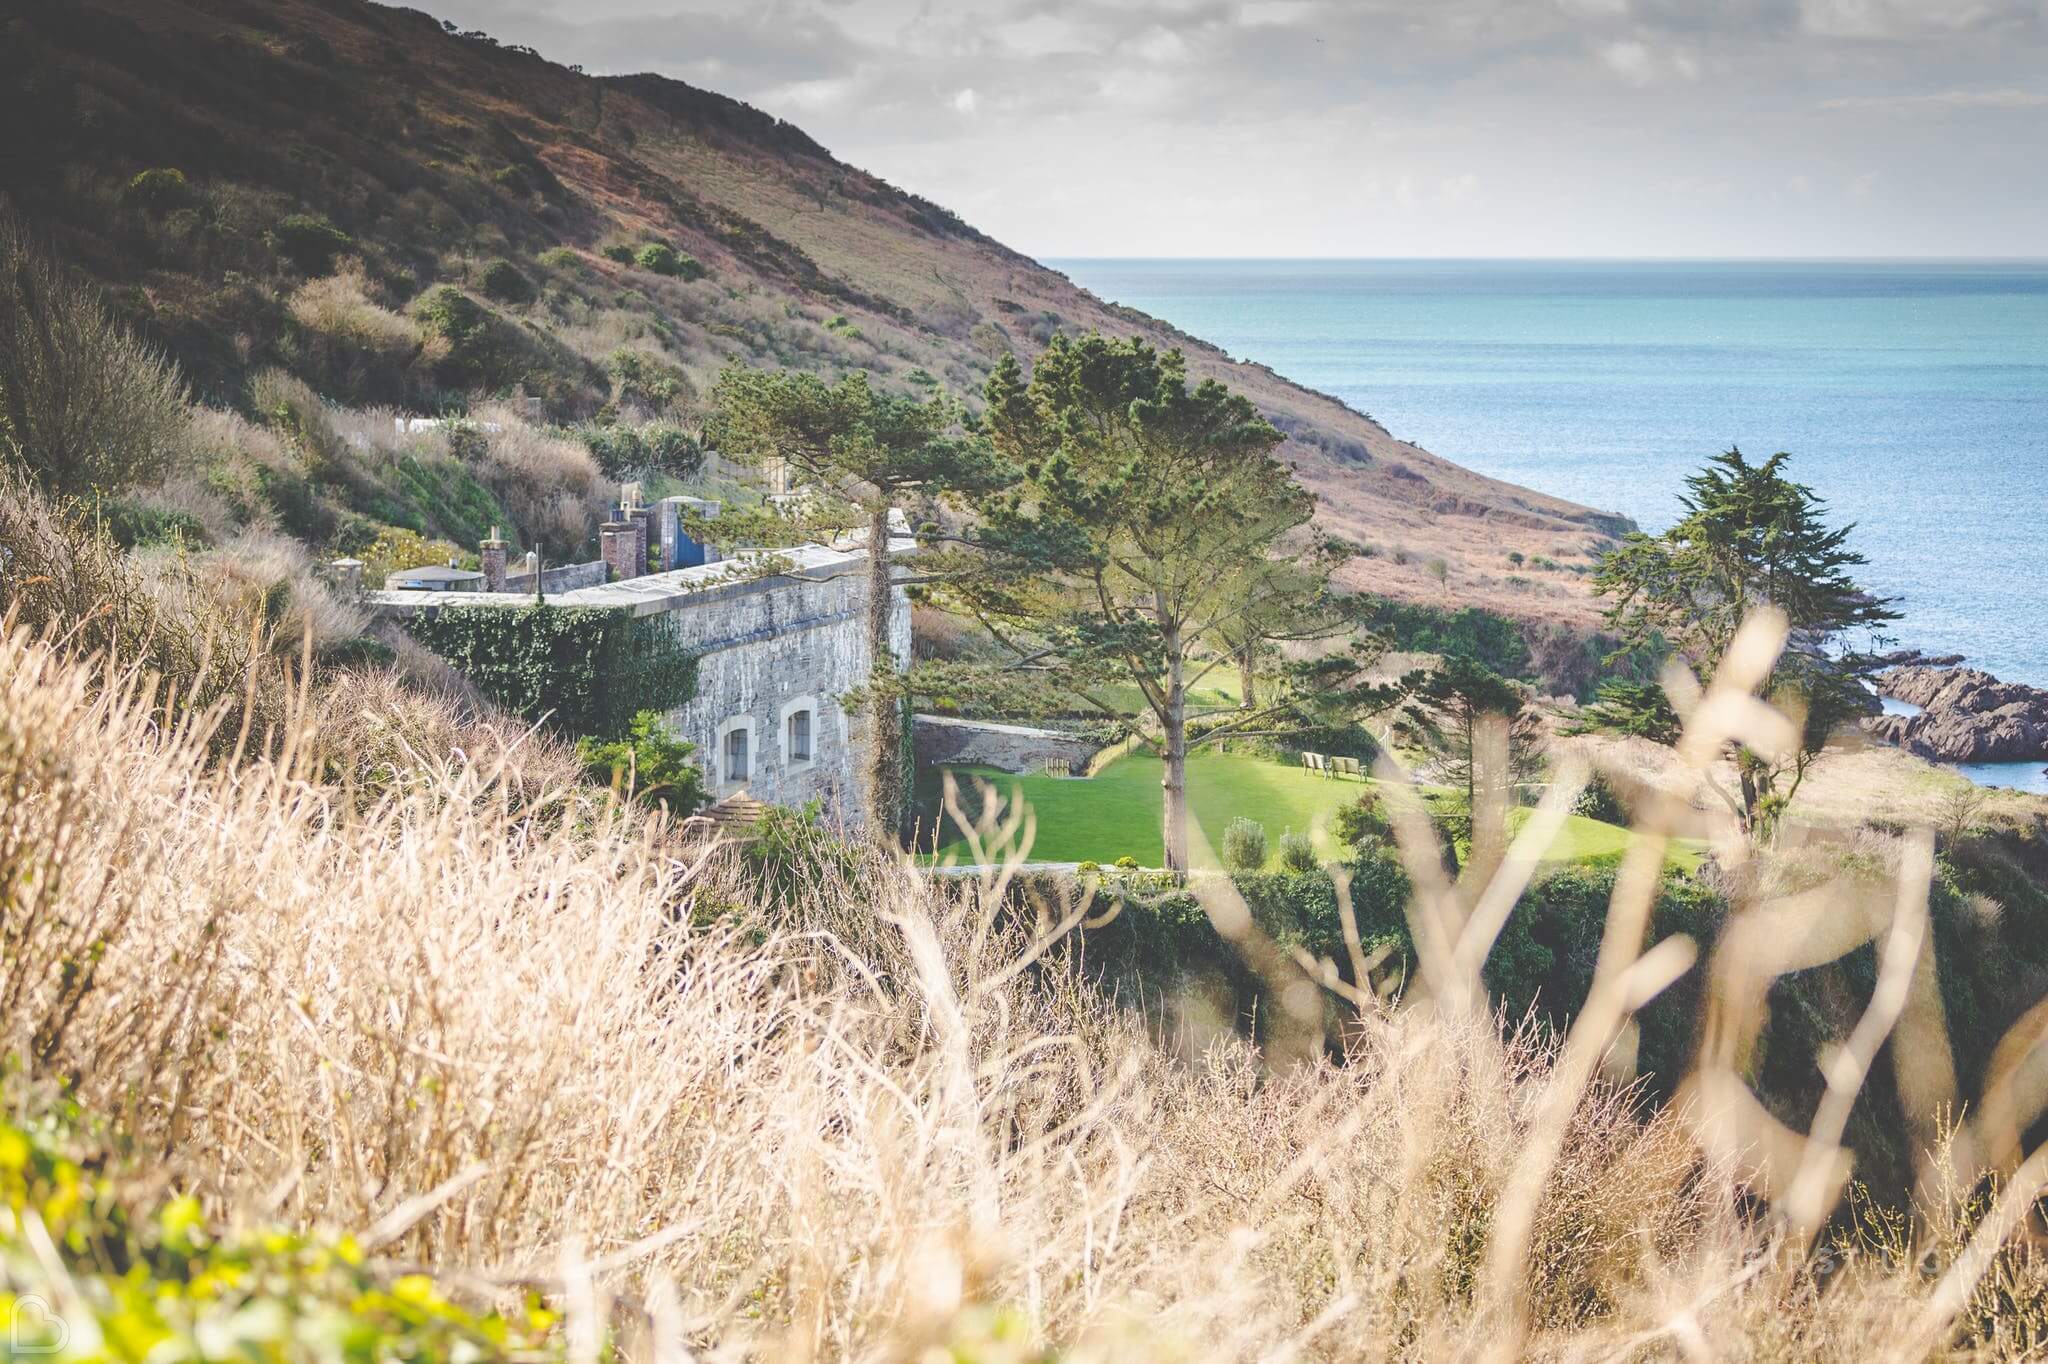 polhawn fort overlooking the sea - a castle wedding venue in the UK